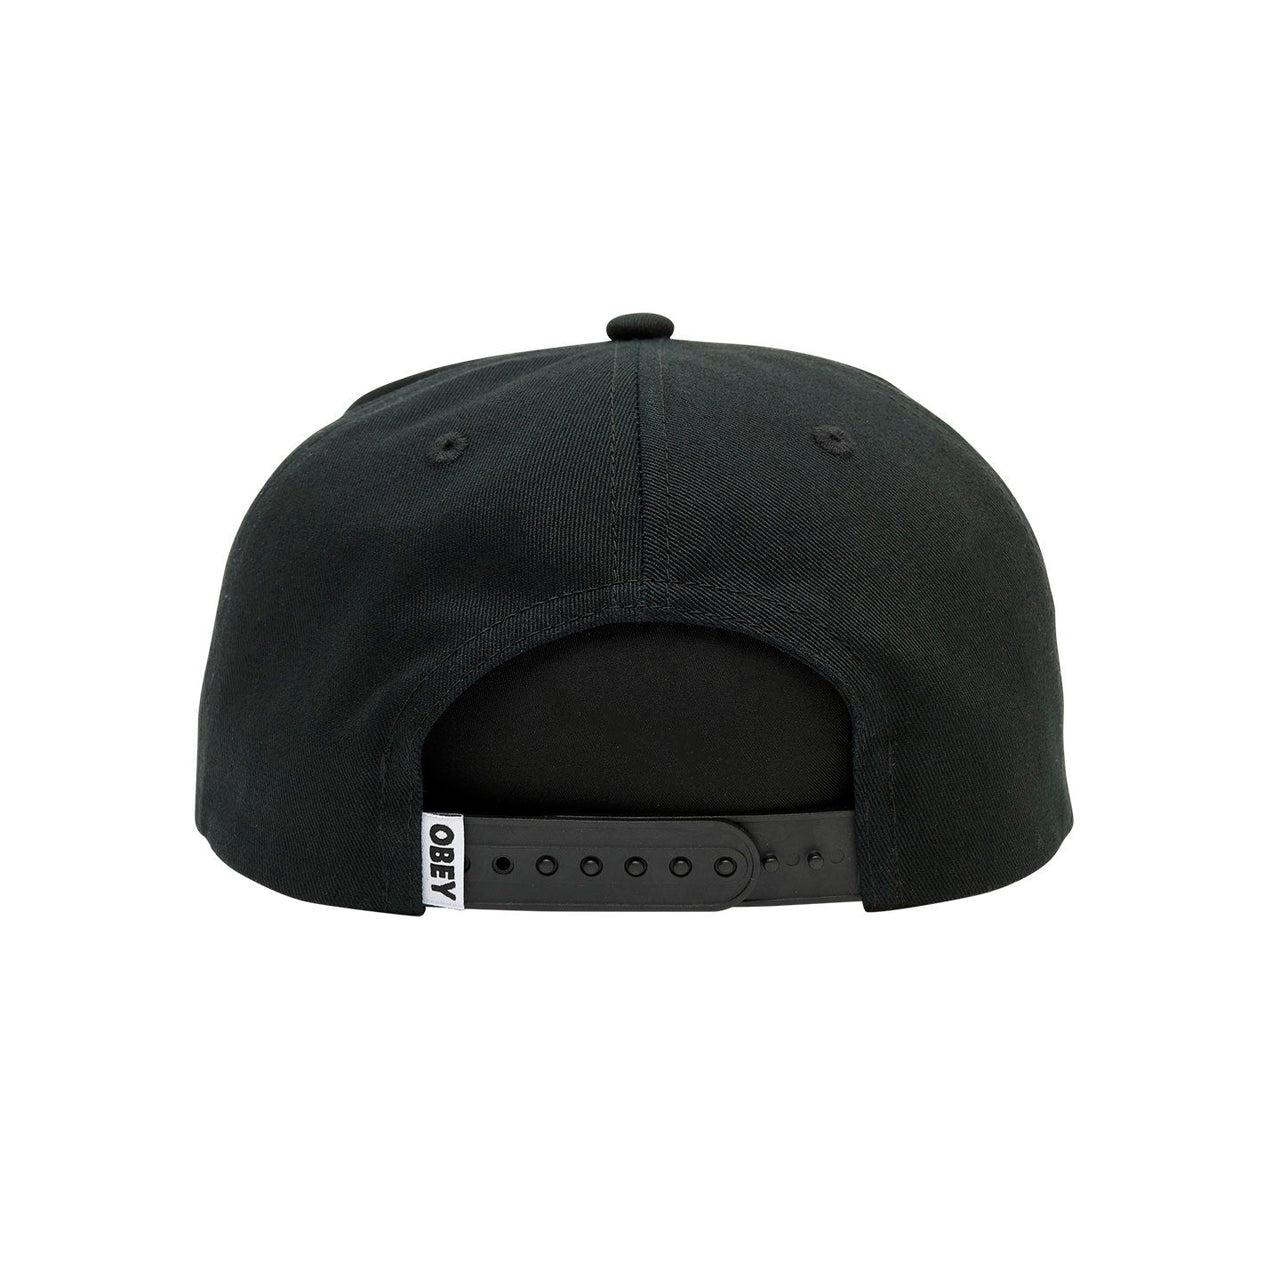 Obey Lowercase 5 Panel Snap - Black